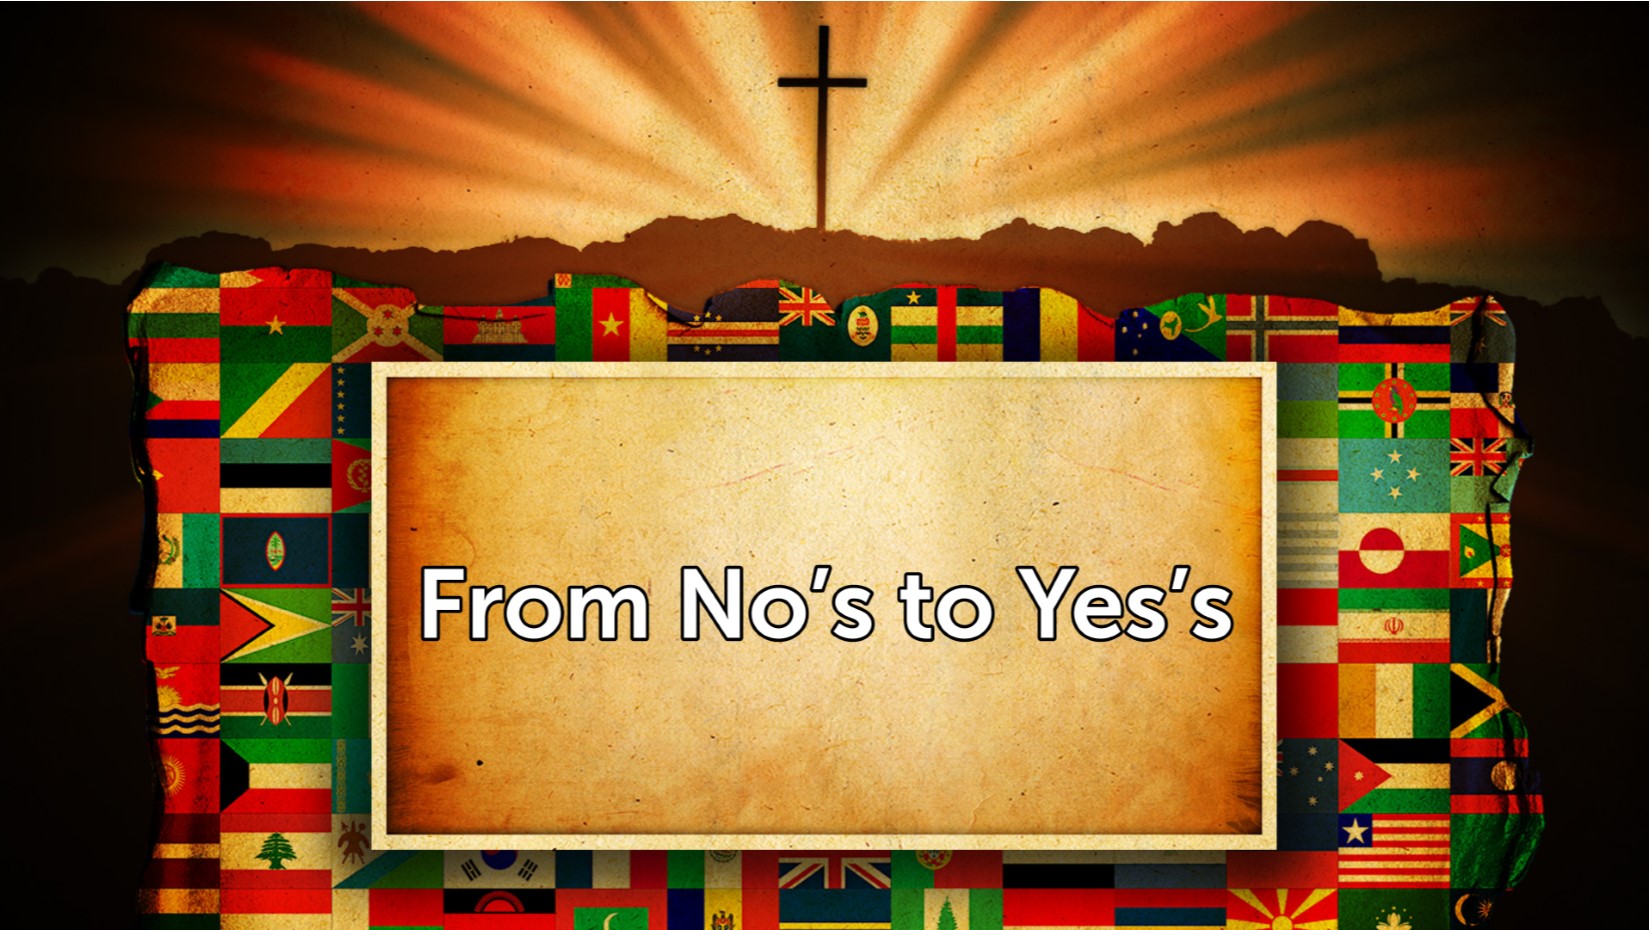 06.07.2020 From No’s to Yes’s